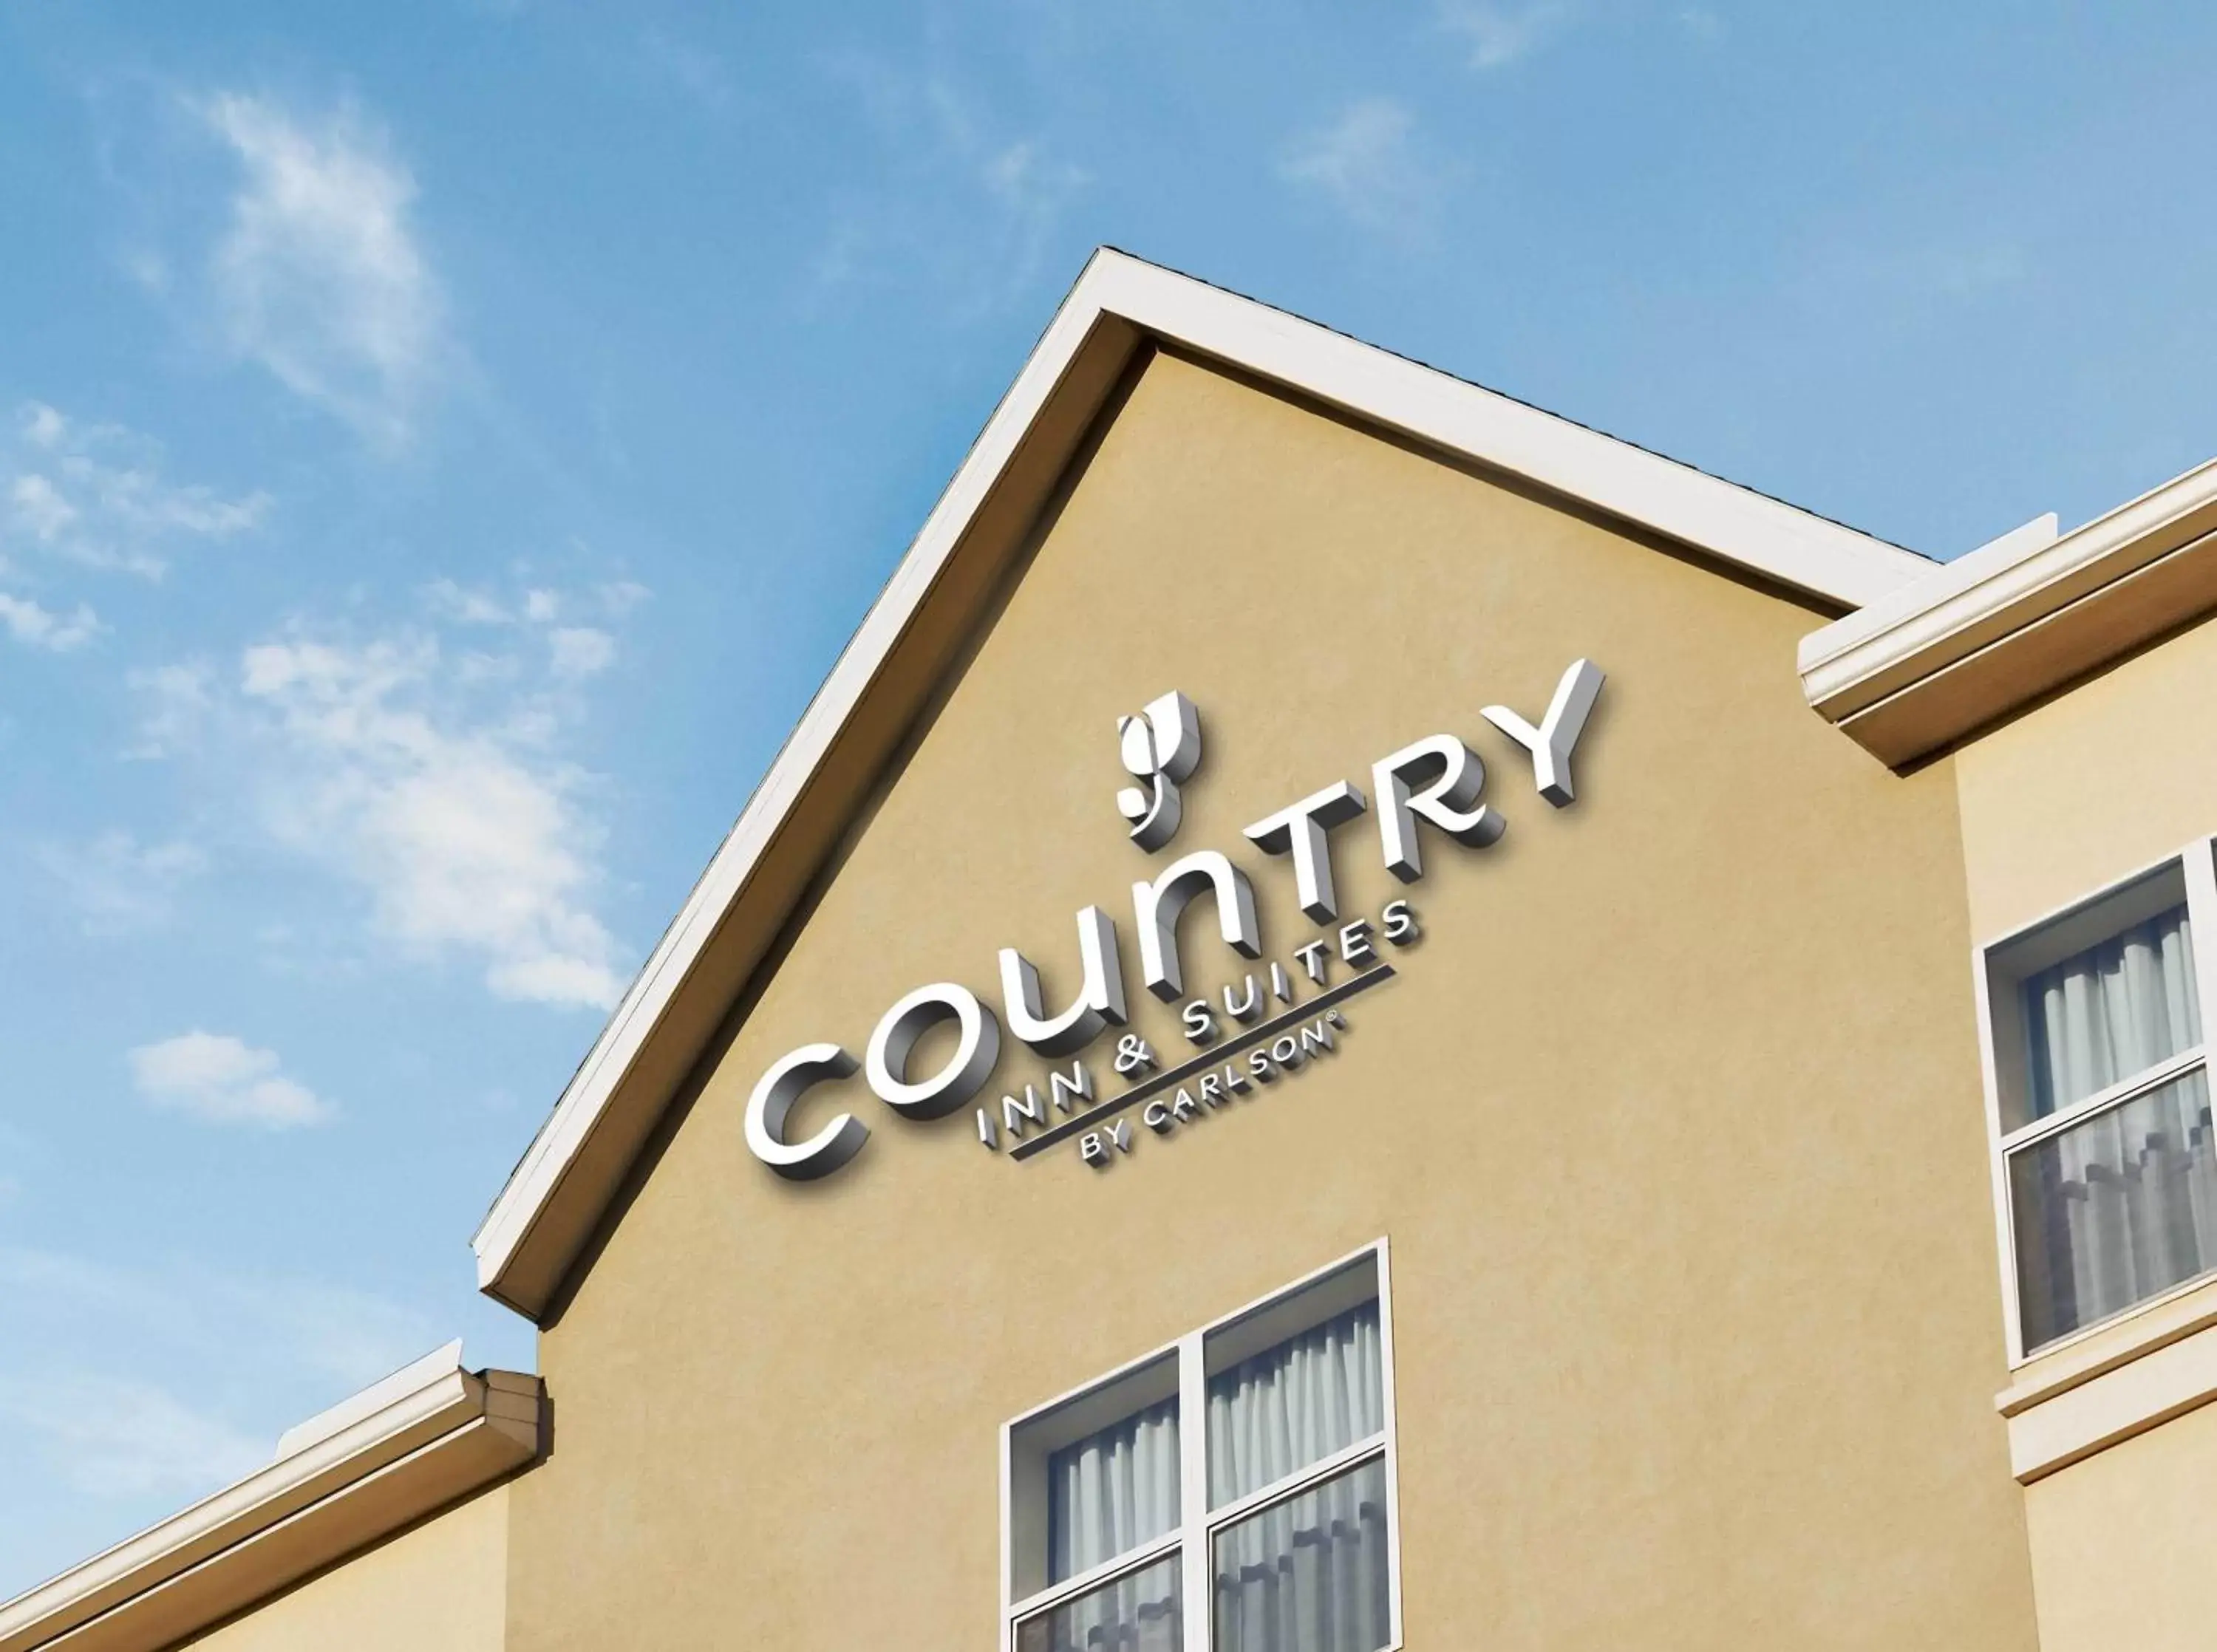 Property building in Country Inn & Suites by Radisson, Clarksville, TN